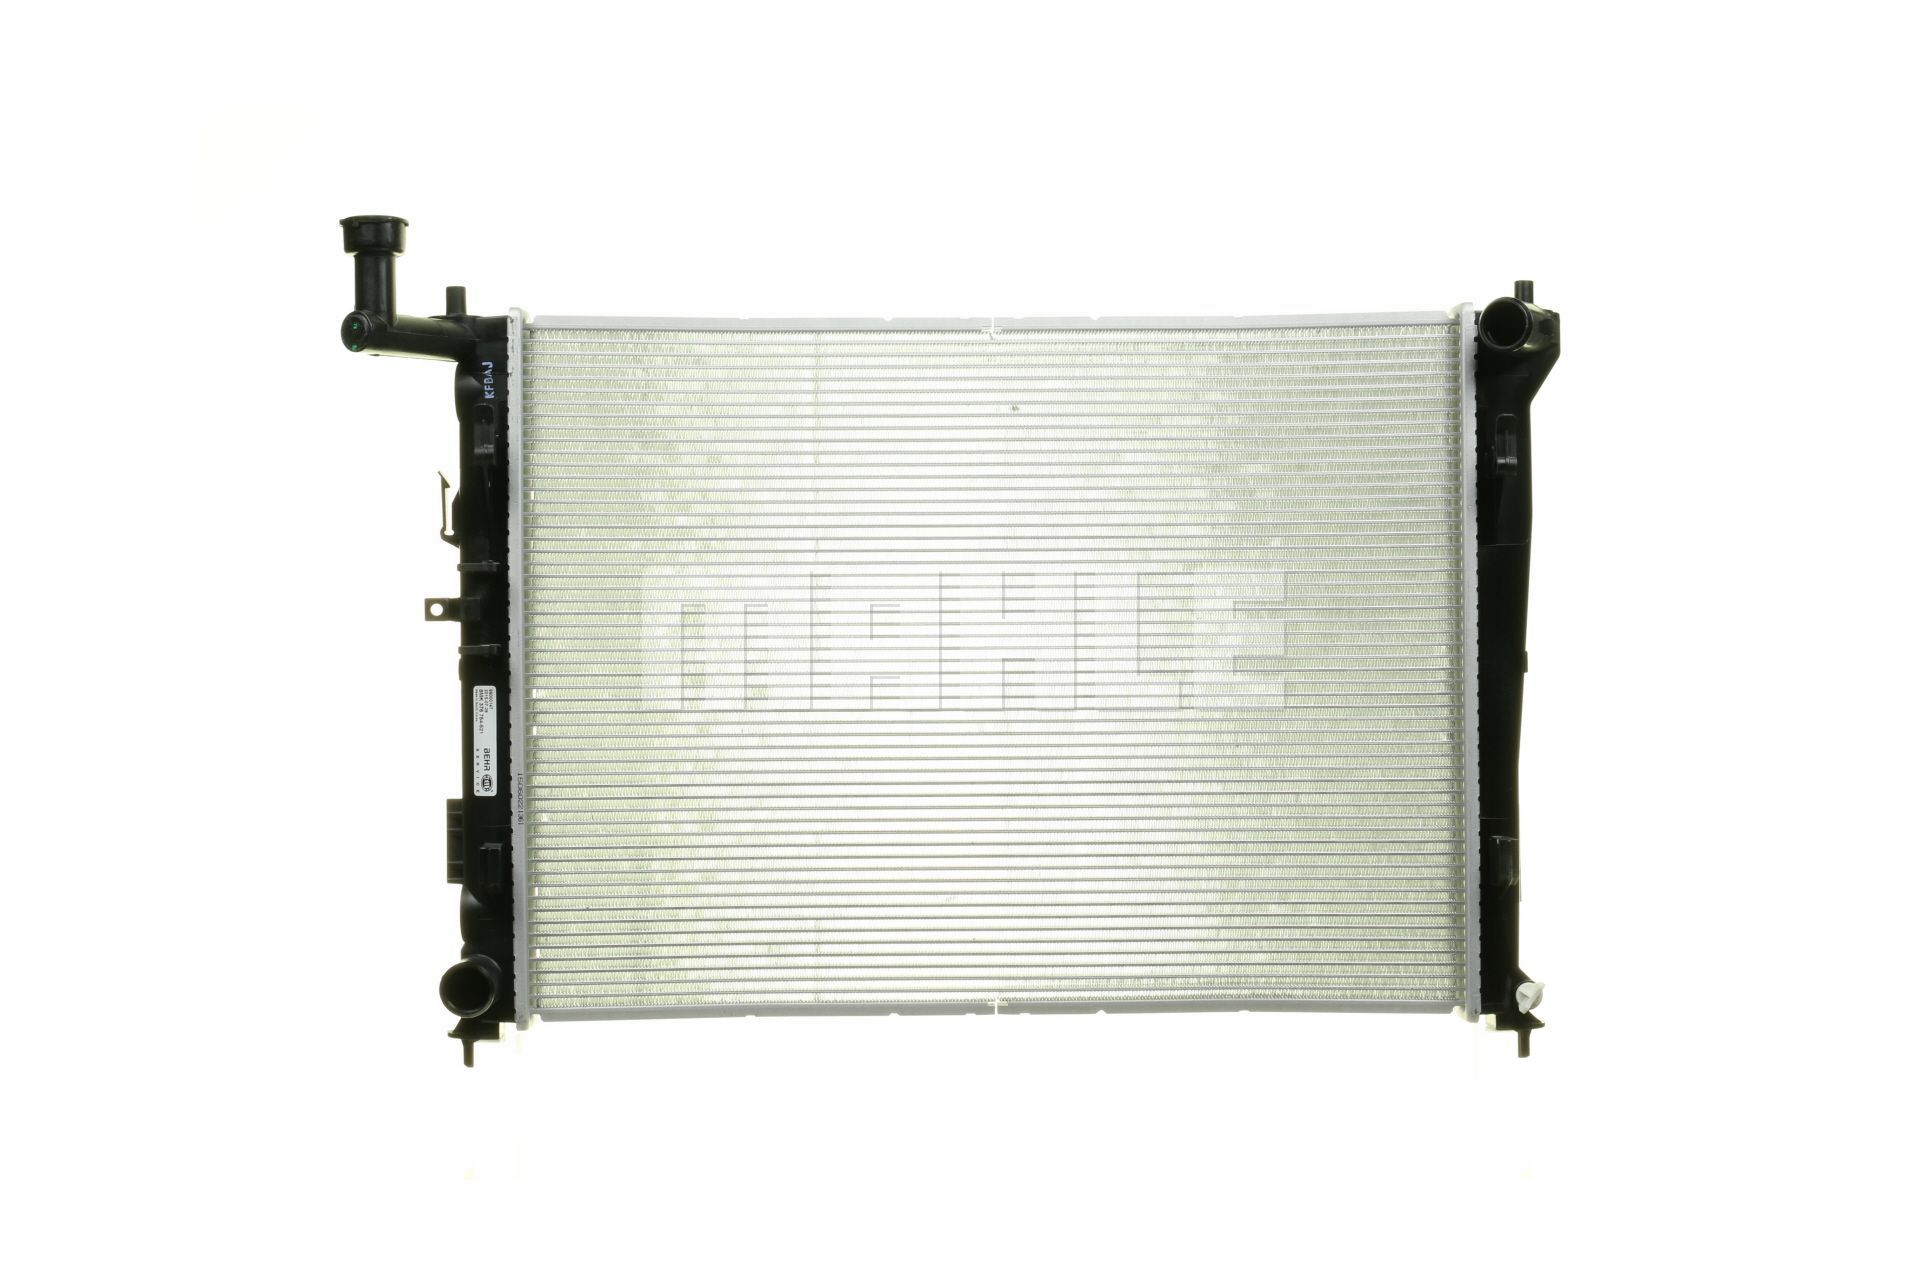 MAHLE ORIGINAL CR 1118 000P Engine radiator for vehicles with air conditioning, 600 x 456 x 14 mm, Manual Transmission, Brazed cooling fins